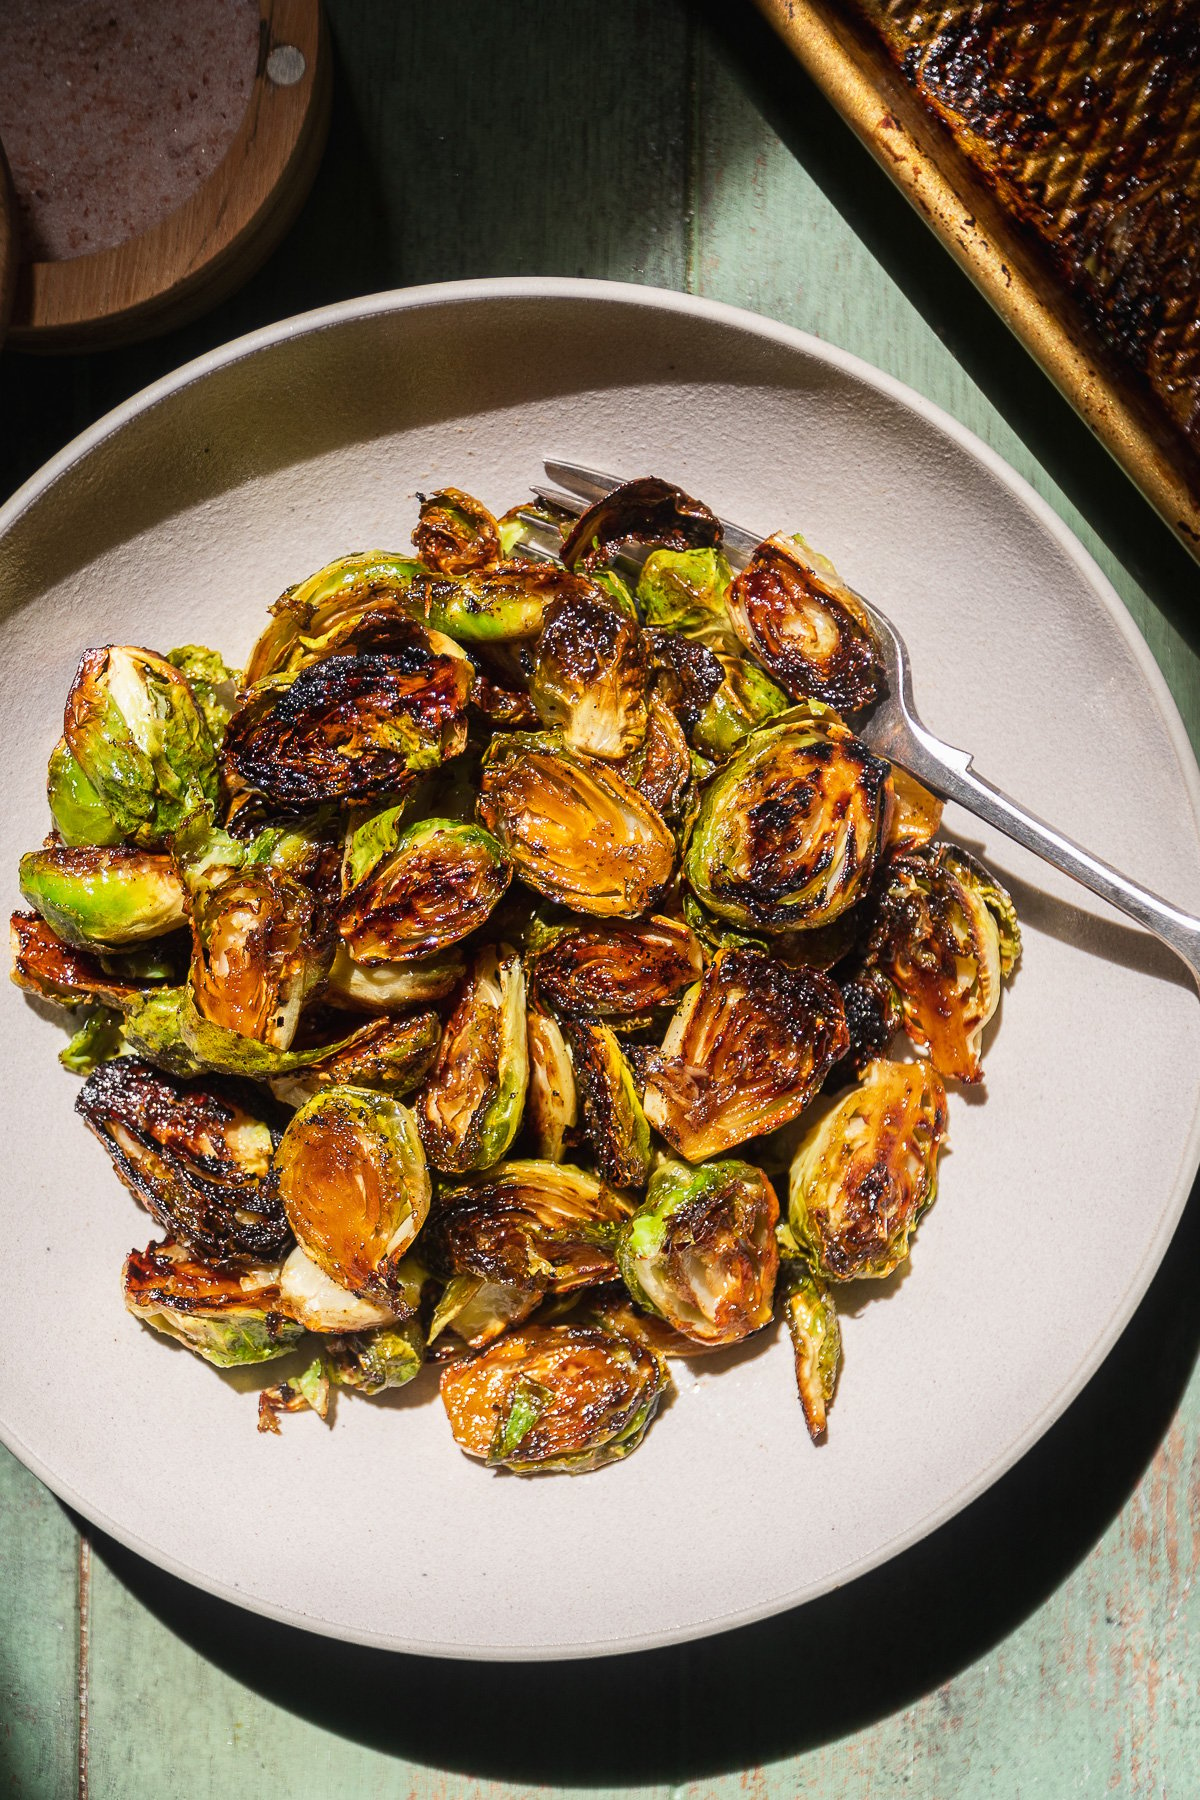 Caramelized brussel sprouts in a serving bowl with a fork.